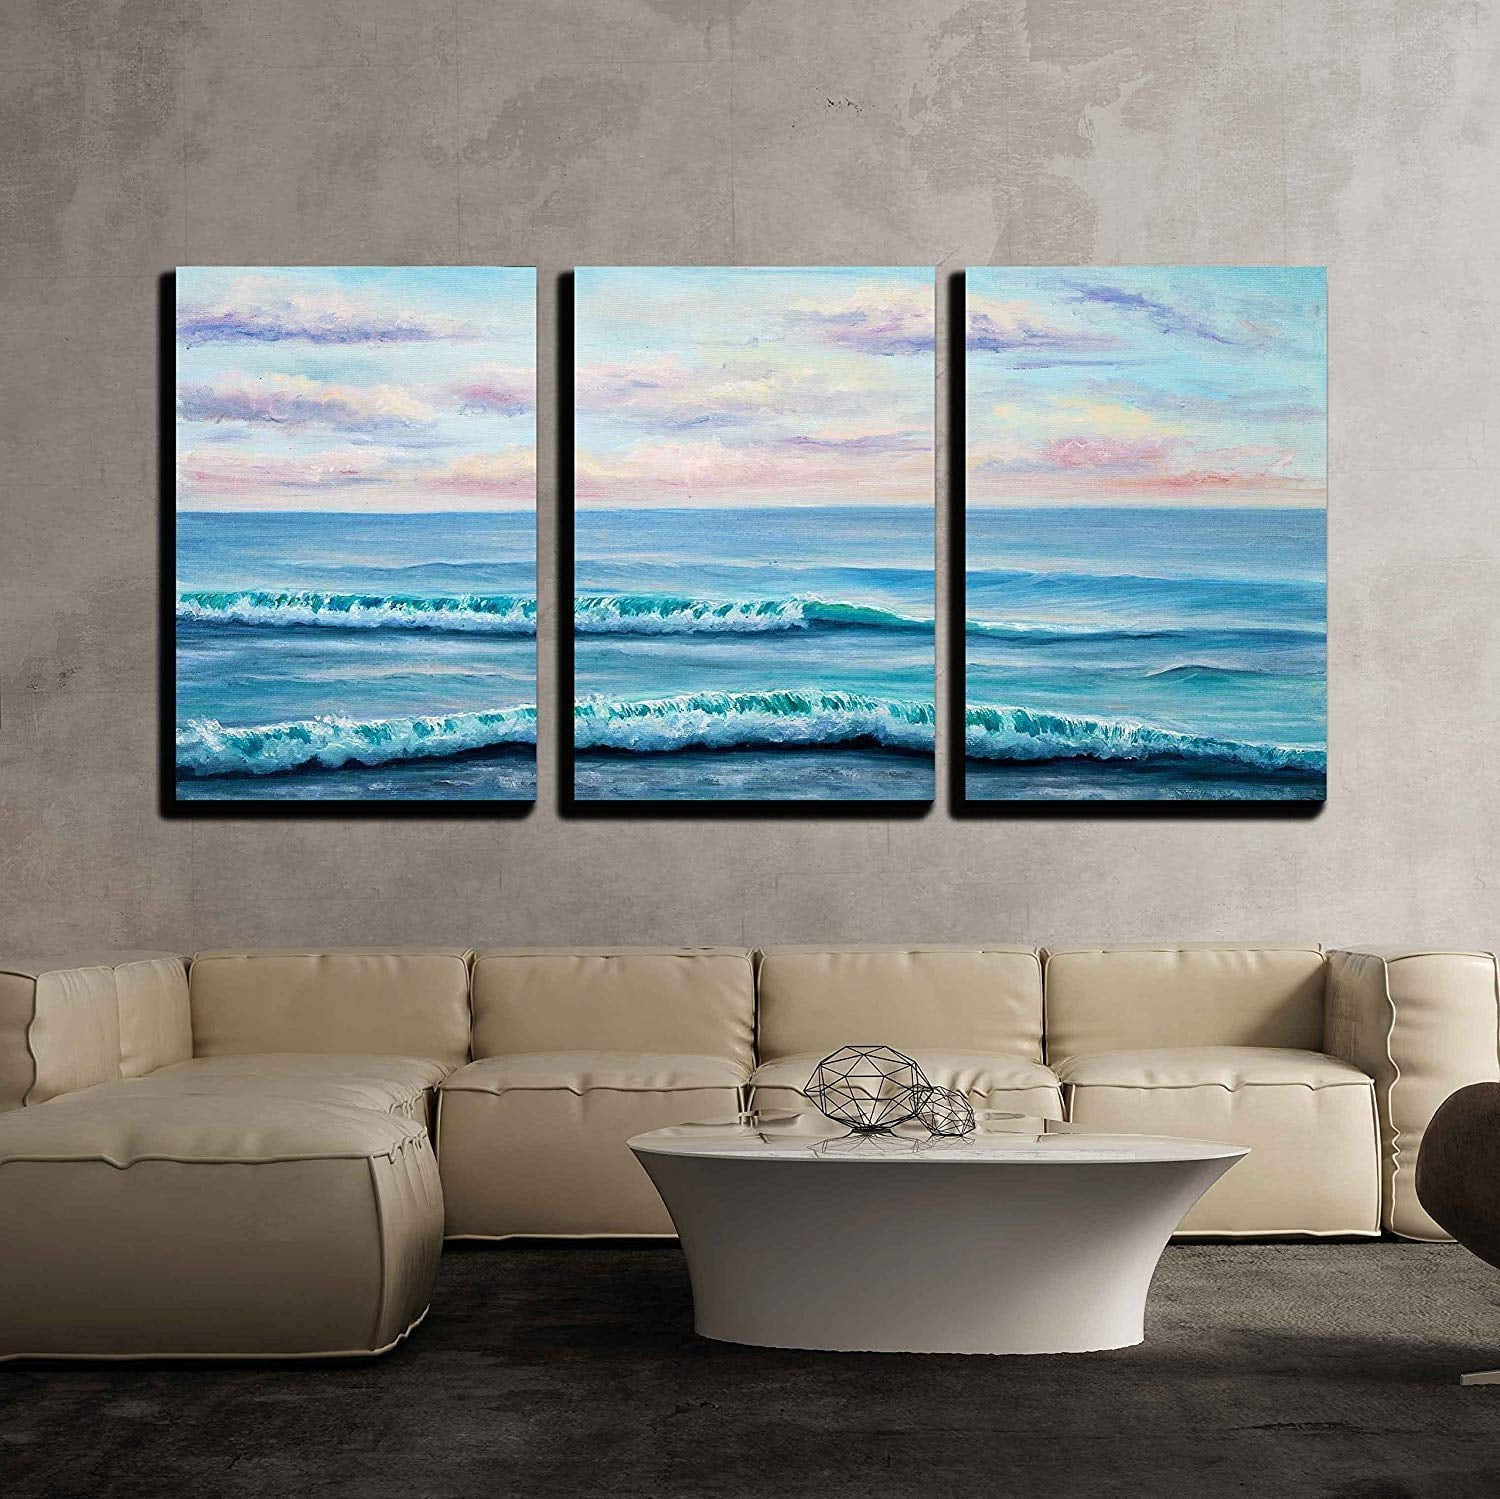 Wall26 3 Piece Canvas Wall Art Original Oil Painting Showing Ocean